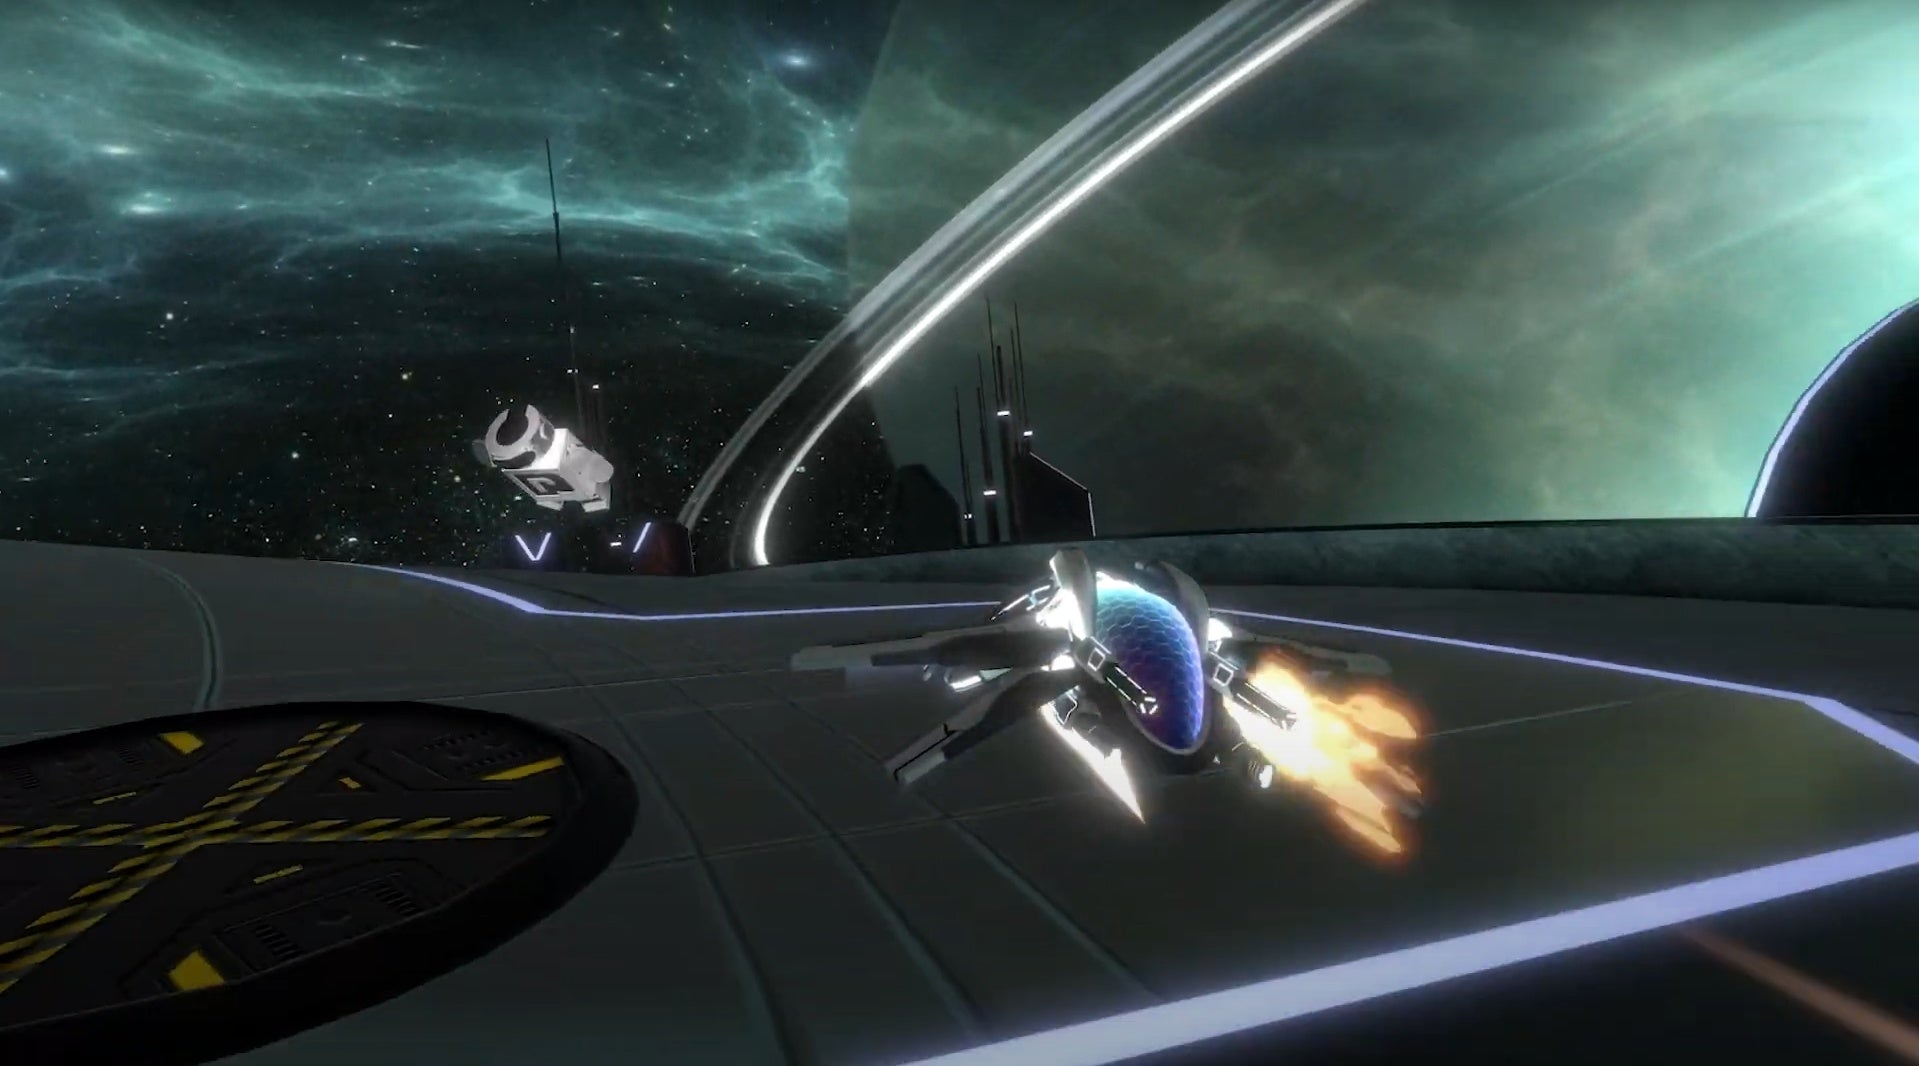 A screenshot of Curved Space, a scifi shmup, showing an R-Type like spaceship on the right and a robot on the left. Bet you can't guess which one of these is a fragrance.